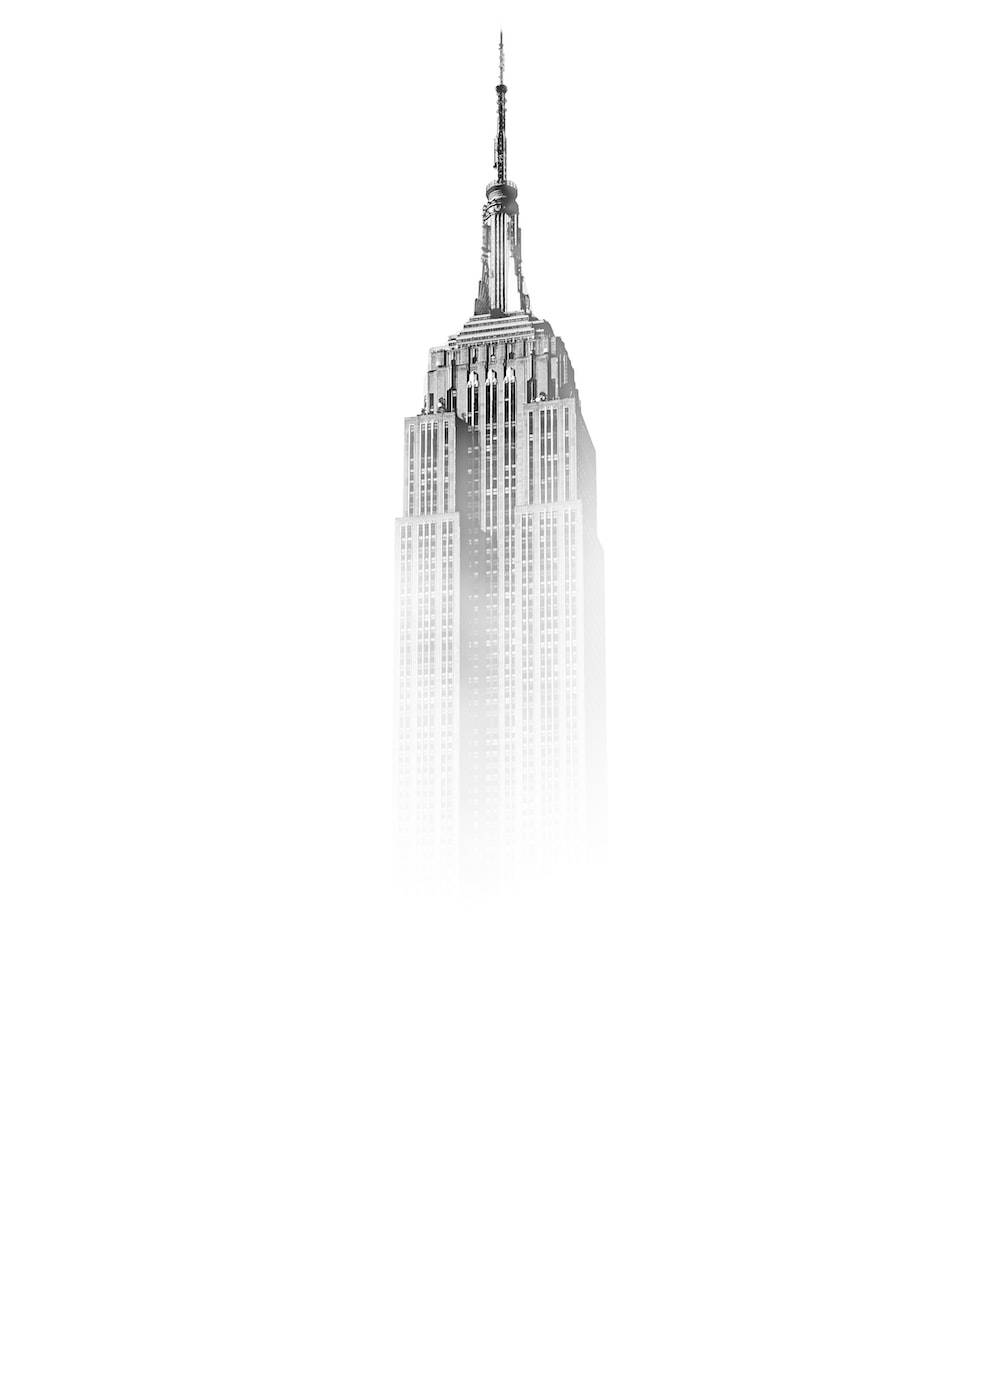 Tall Building Sketch On Plain White